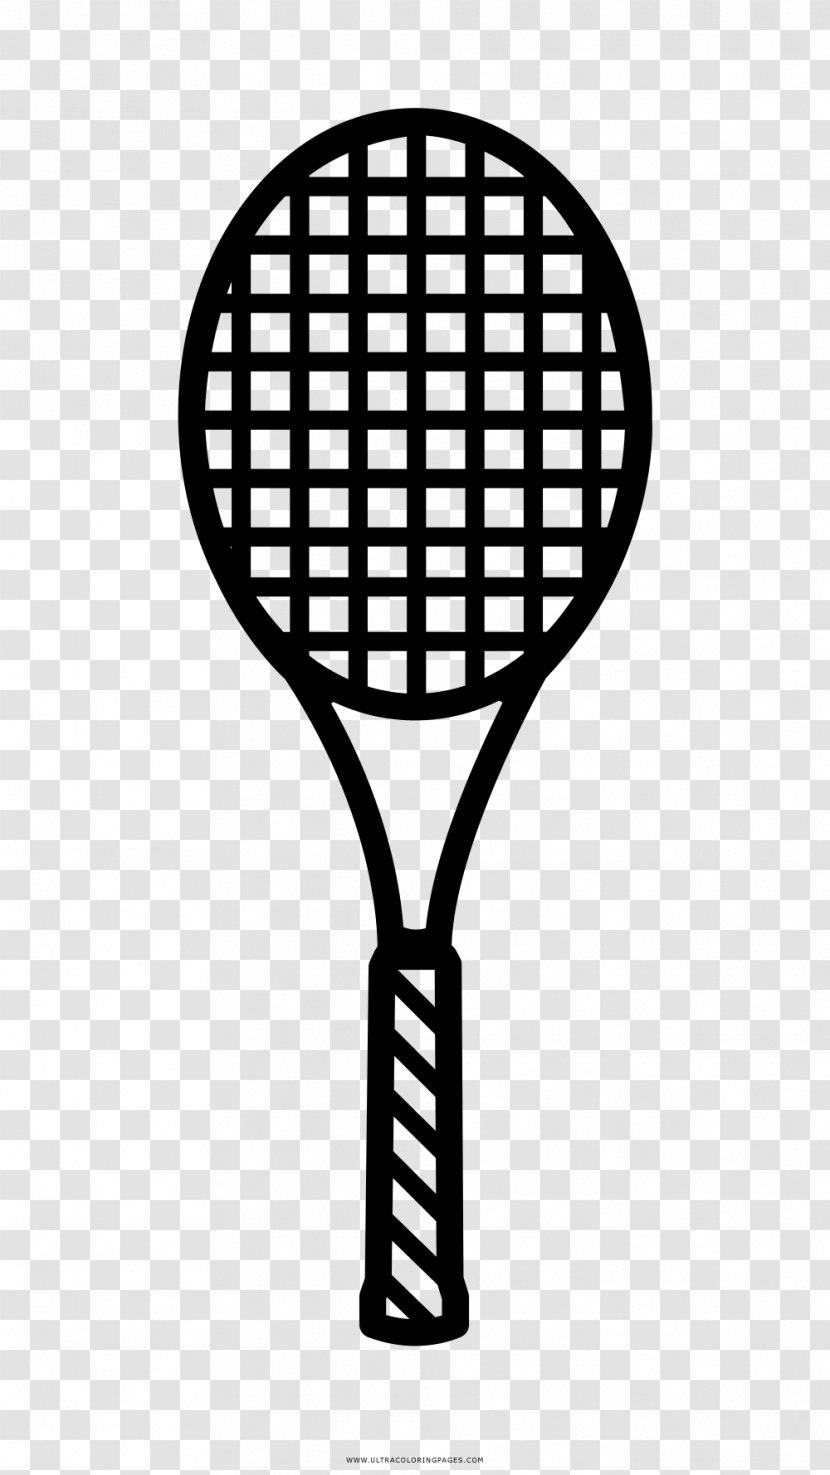 Stock Photography - Tennis Equipment And Supplies - Page Poster Transparent PNG